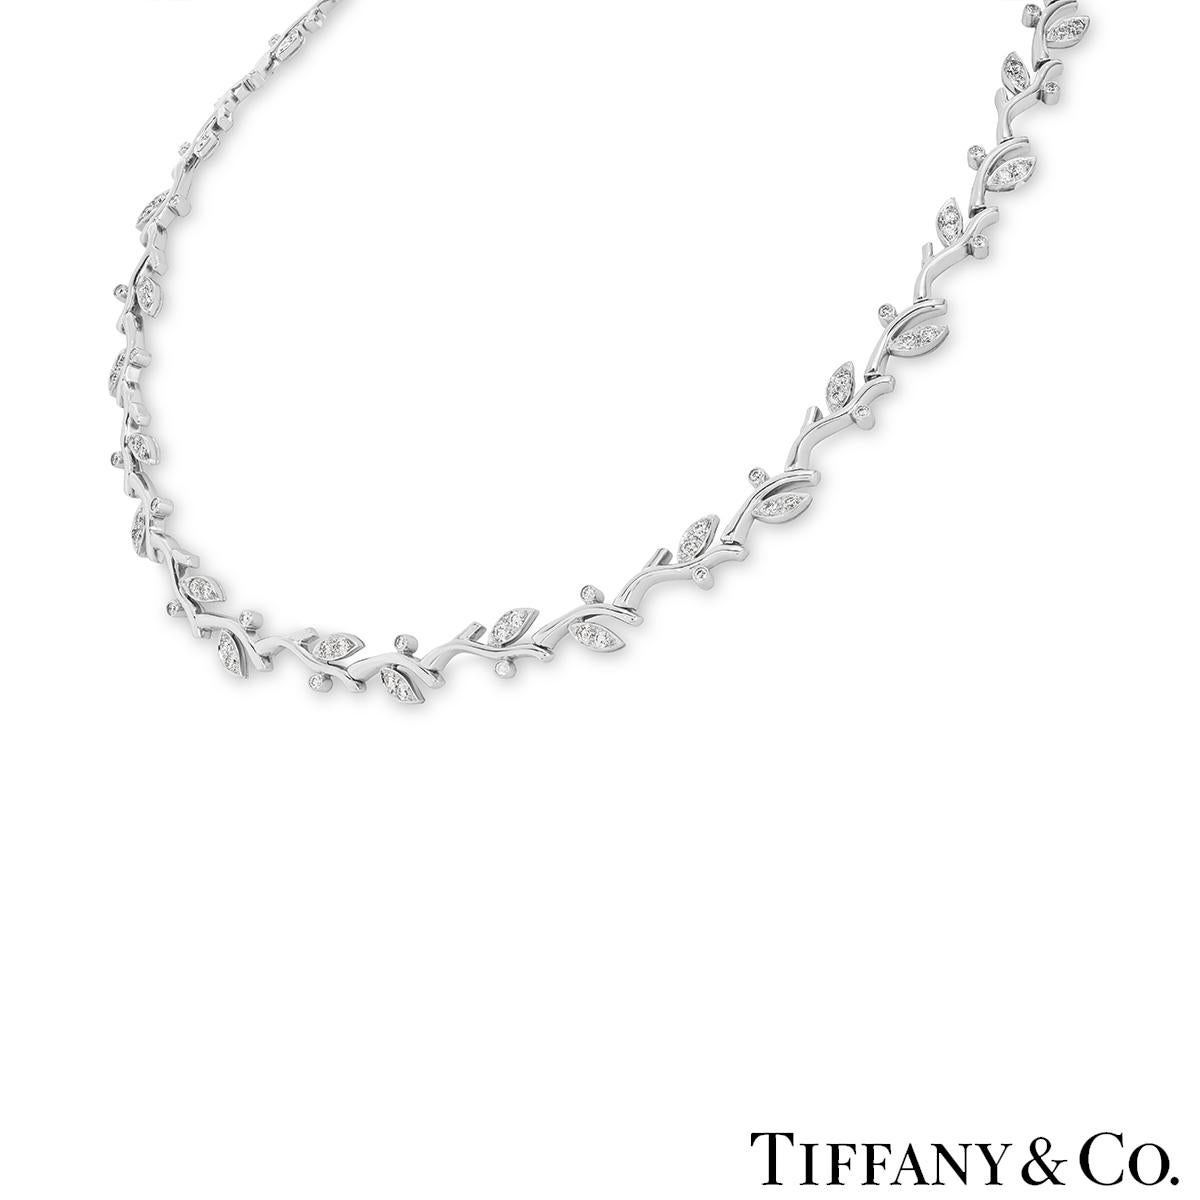 A stunning platinum diamond necklace by Tiffany & Co. from Paloma Picasso's Olive Leaf collection. The collar-style necklace displays a design of leaves on a vine set with 102 round brilliant cut diamonds with an approximate total weight of 2.55ct,